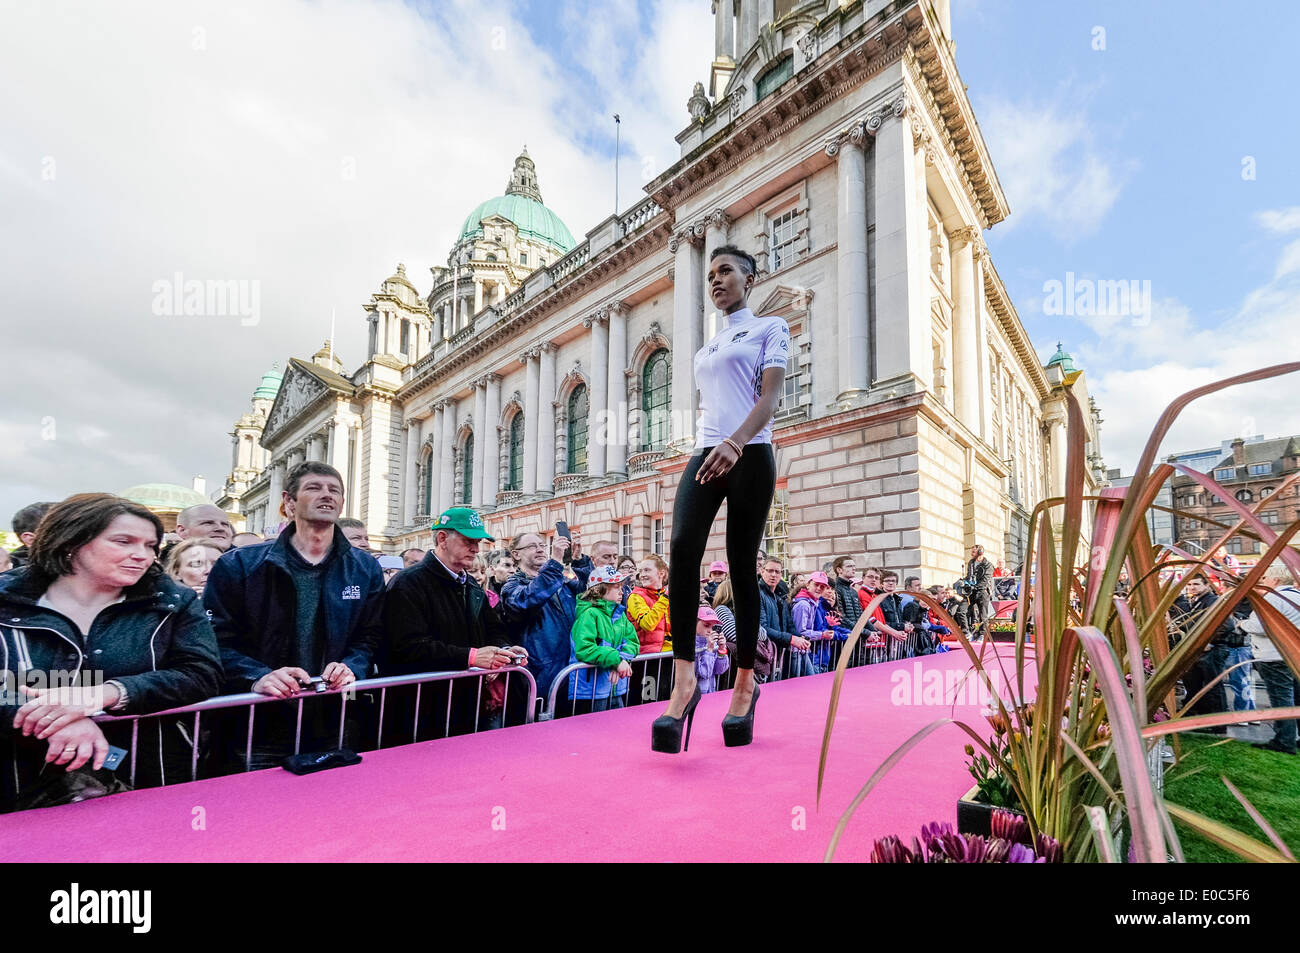 Belfast, Northern Irealand, 8 May 2014 - A model shows off the Maglia Bianca (White Jersey), worn by the leader of the junior category, at the launch of the Giro d'Italia Credit:  Stephen Barnes/Alamy Live News Stock Photo